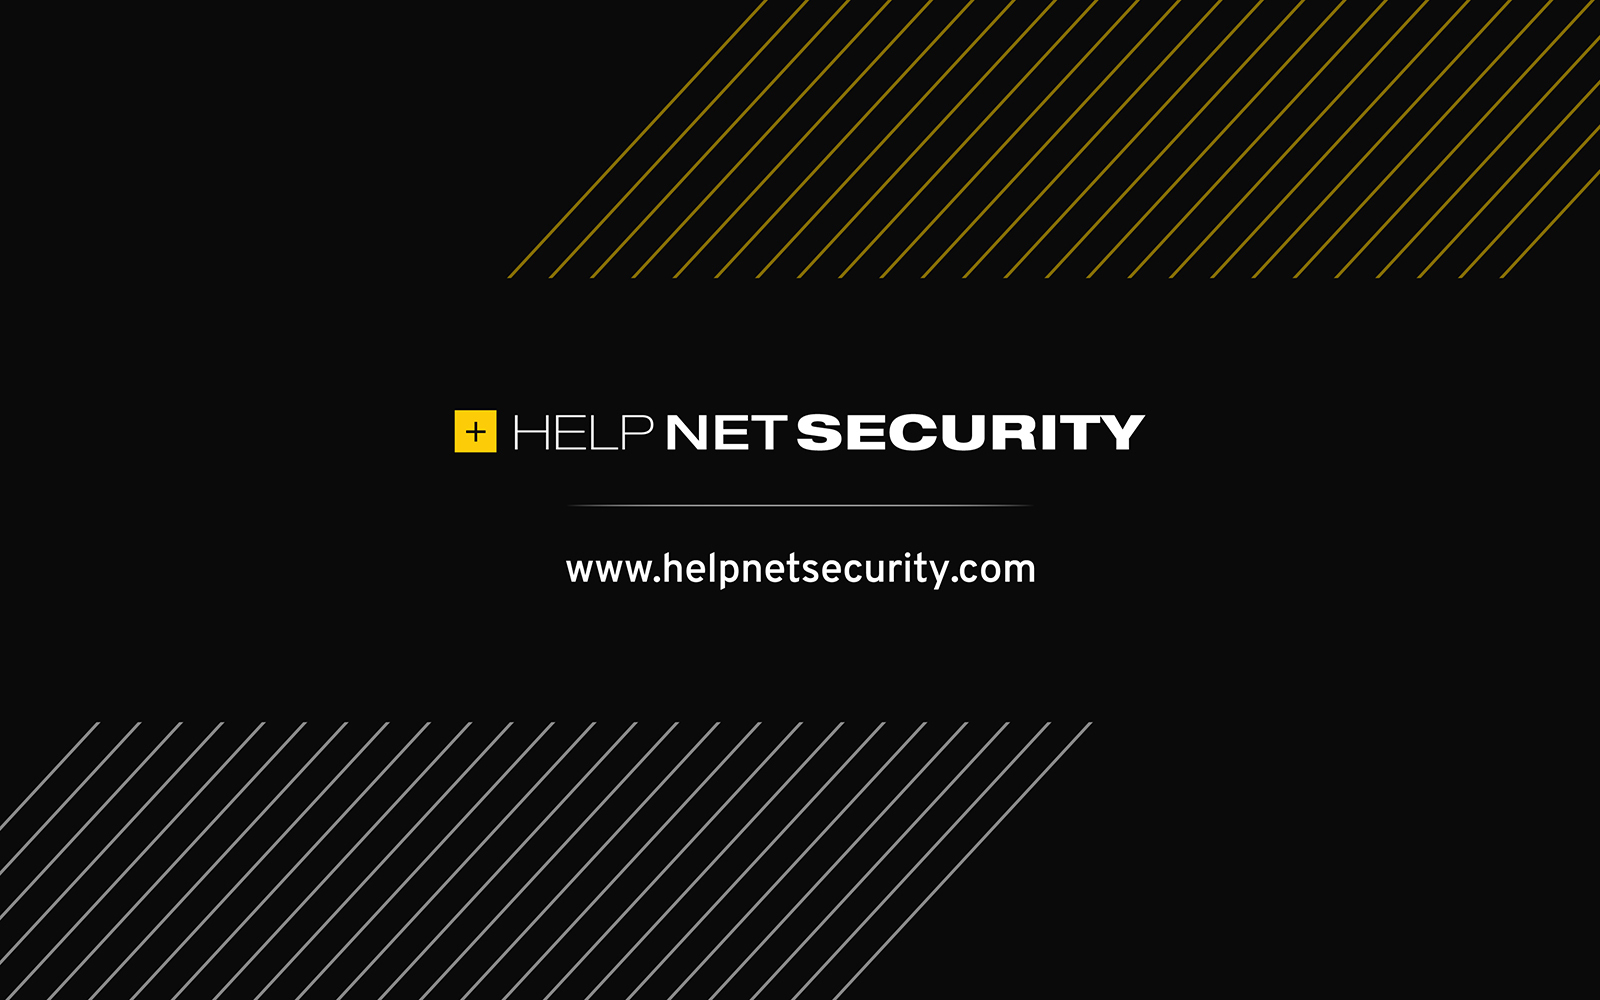 blackpoint-cyber-raises-$190-million-to-fund-further-development-of-its-security-technology